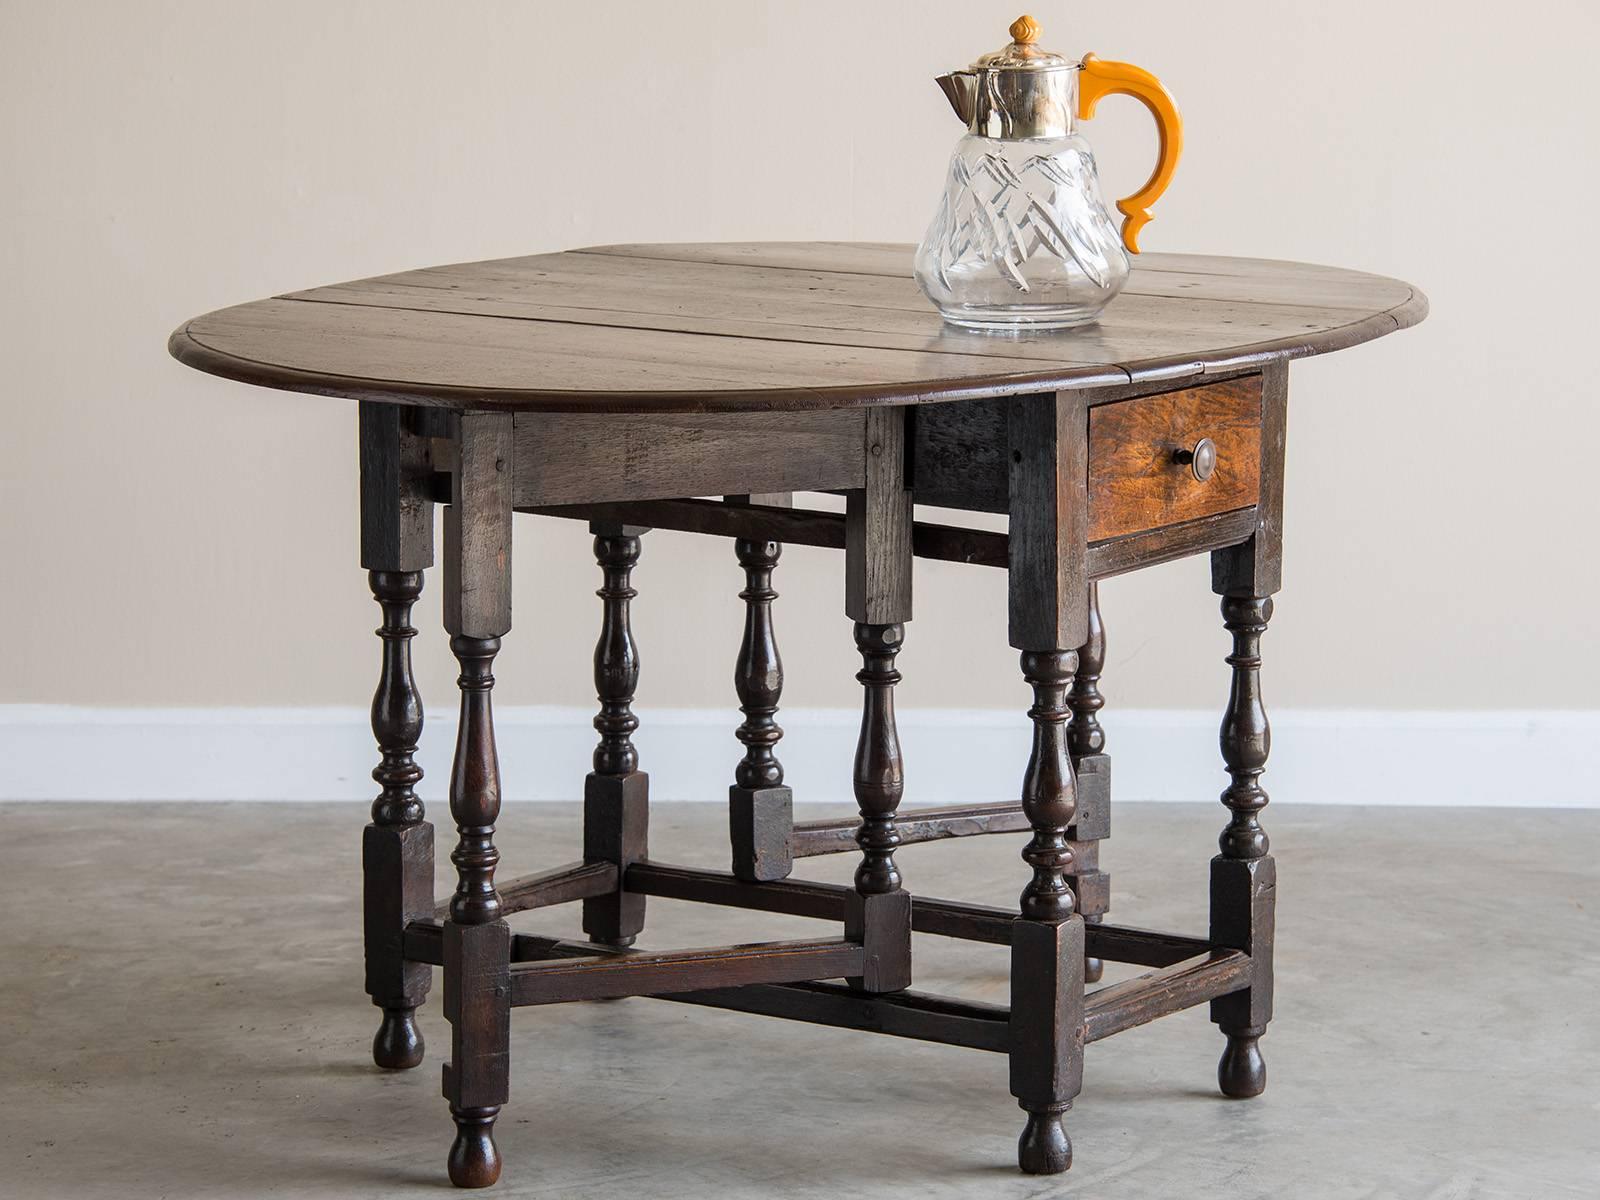 Receive our new selections direct from 1stdibs by email each week. Please click Follow Dealer below and see them first!

This antique English oak drop-leaf table, circa 1790 has a robust and bold profile. First appearing in seventeenth century